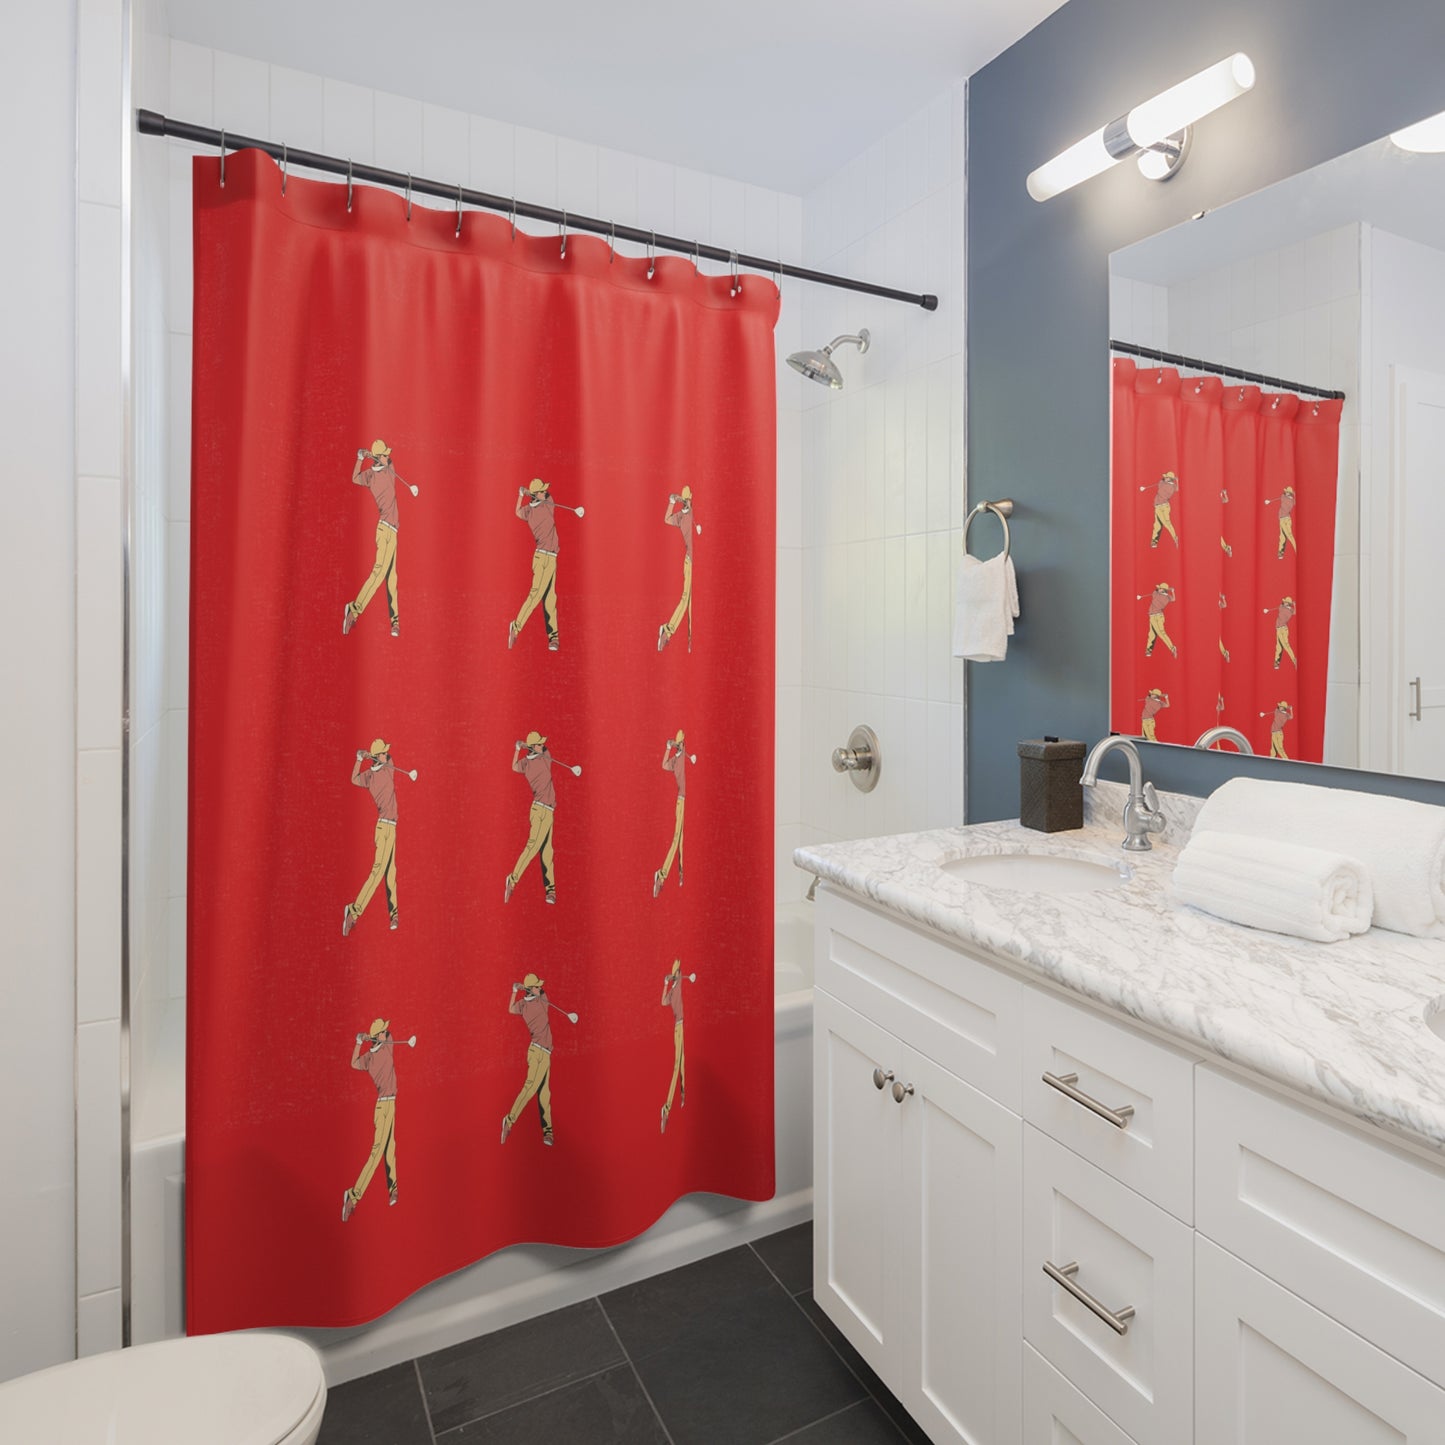 Shower Curtains: #2 Golf Red